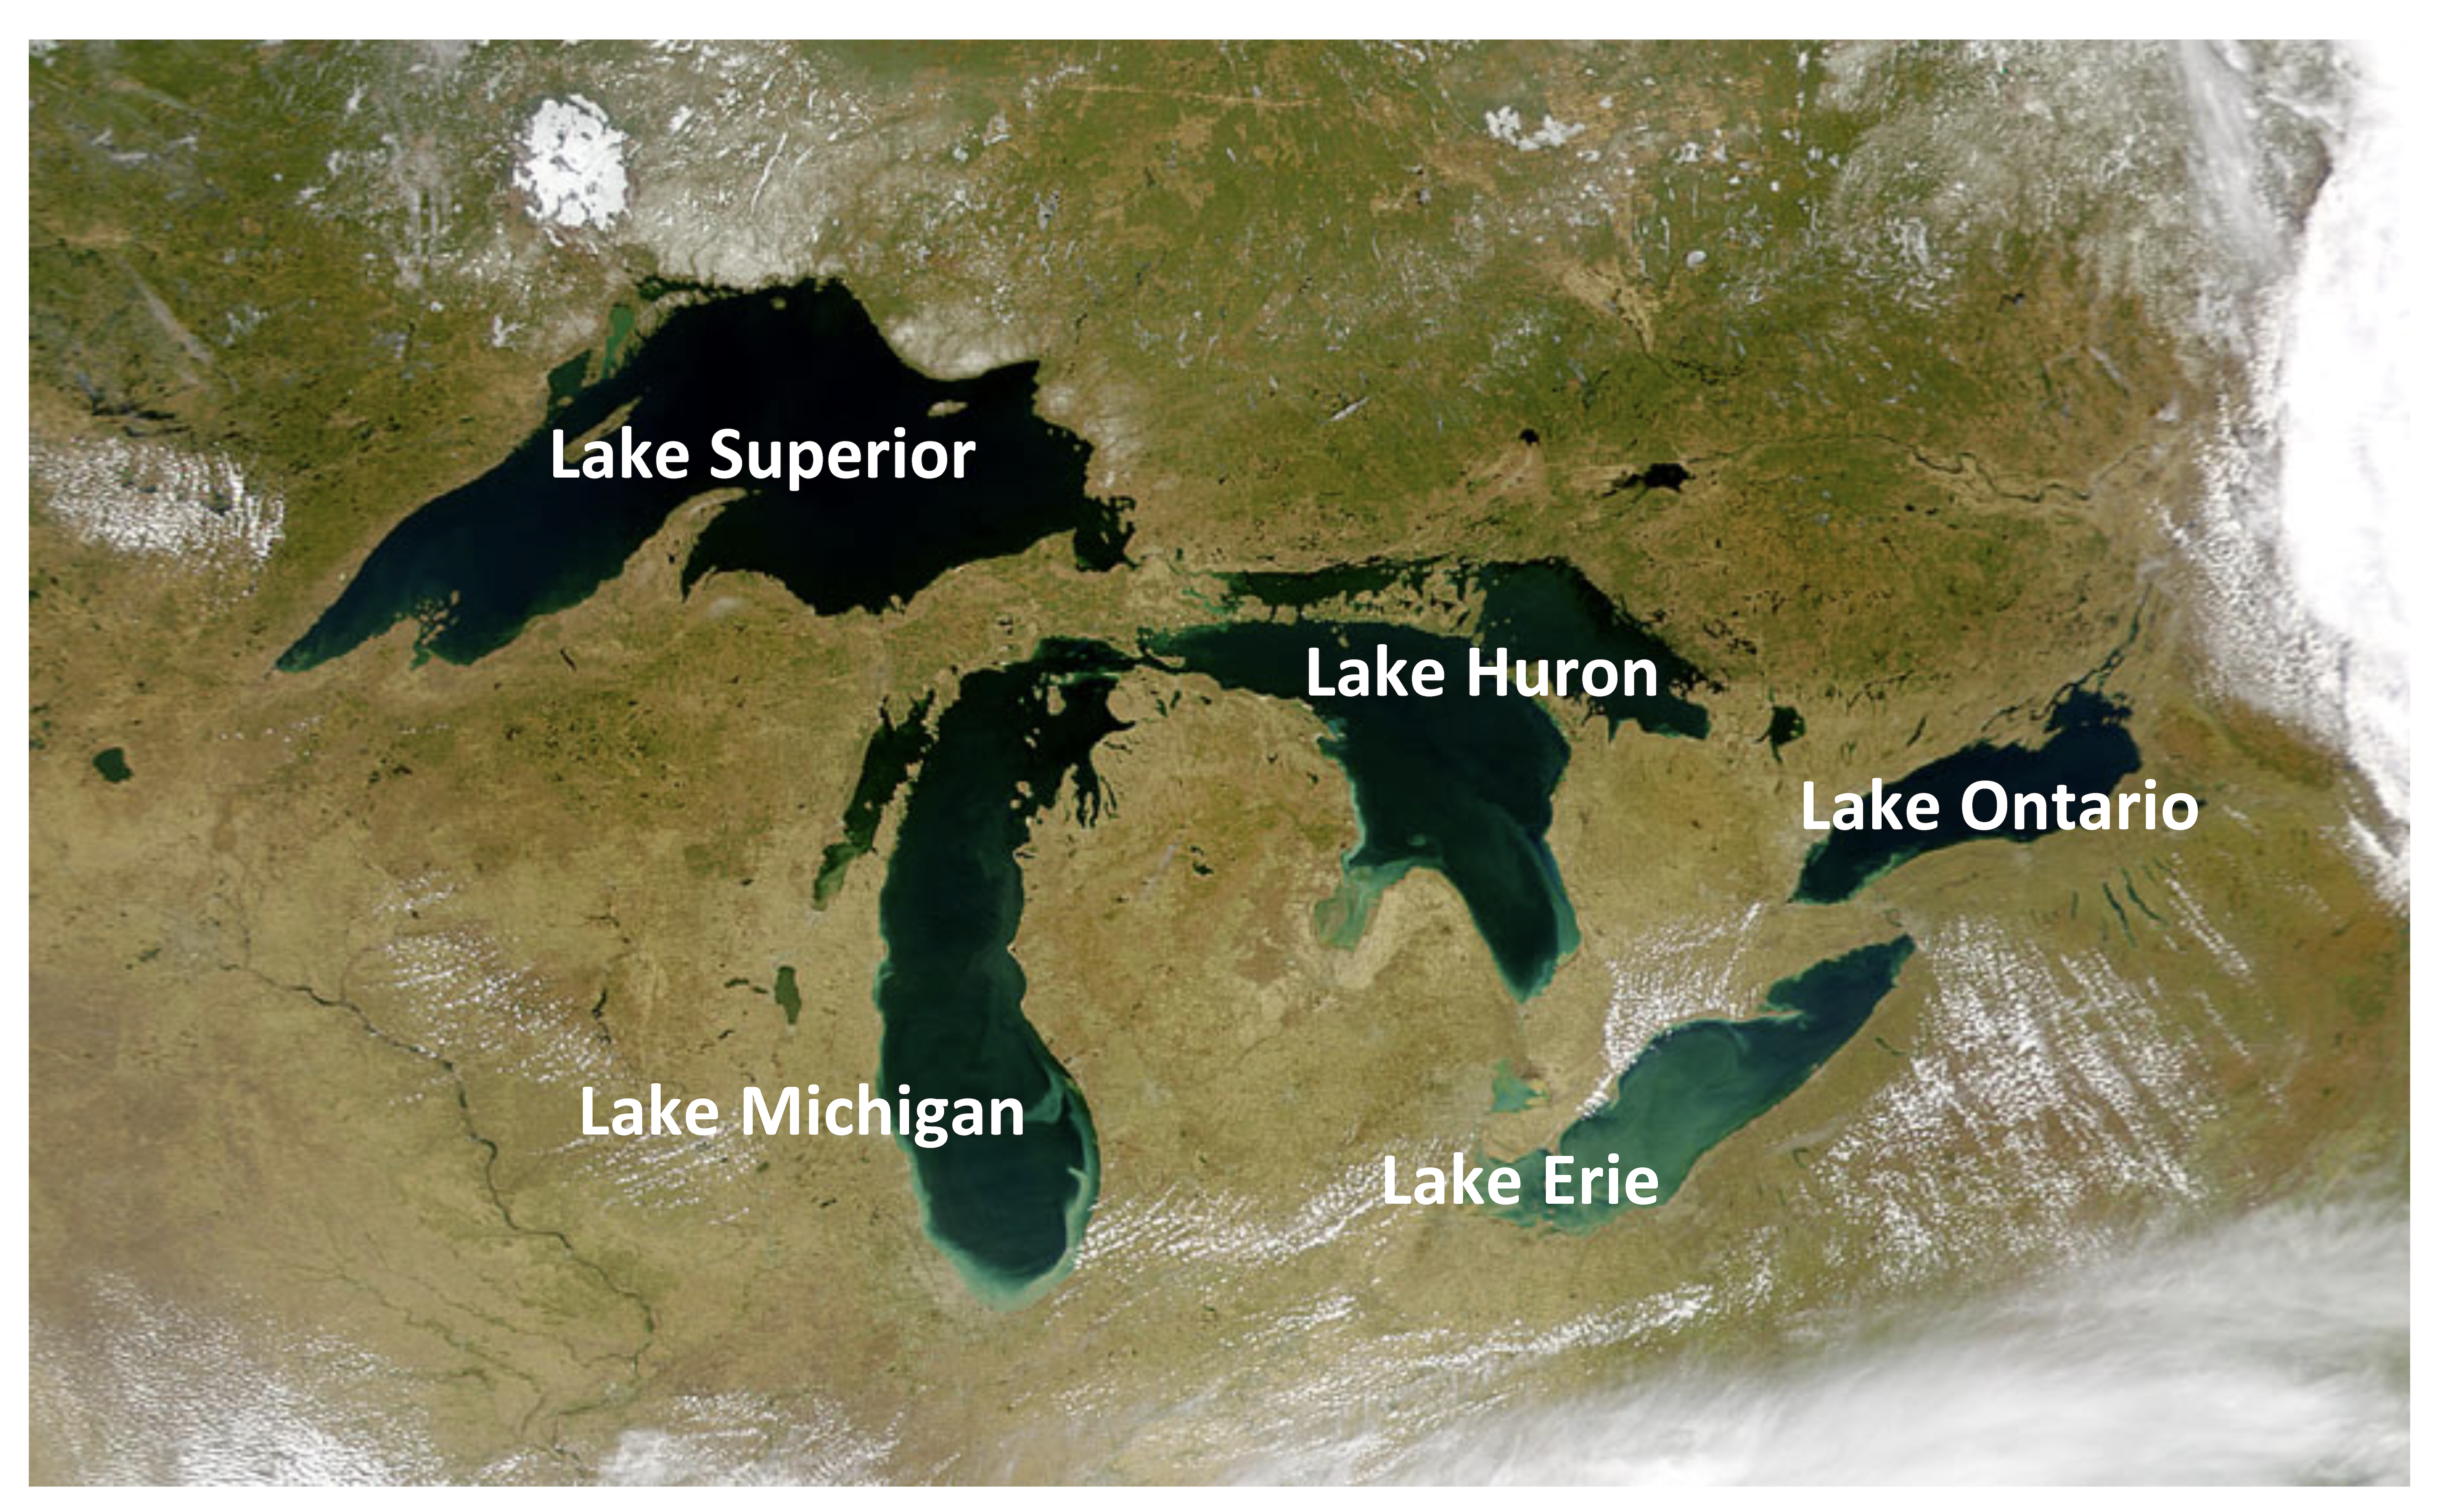 Aerial view of the five great lakes (Superior, Huron, Michigan, Erie, Ontario) that occupy basins left by the ice sheet in the Ice Age.